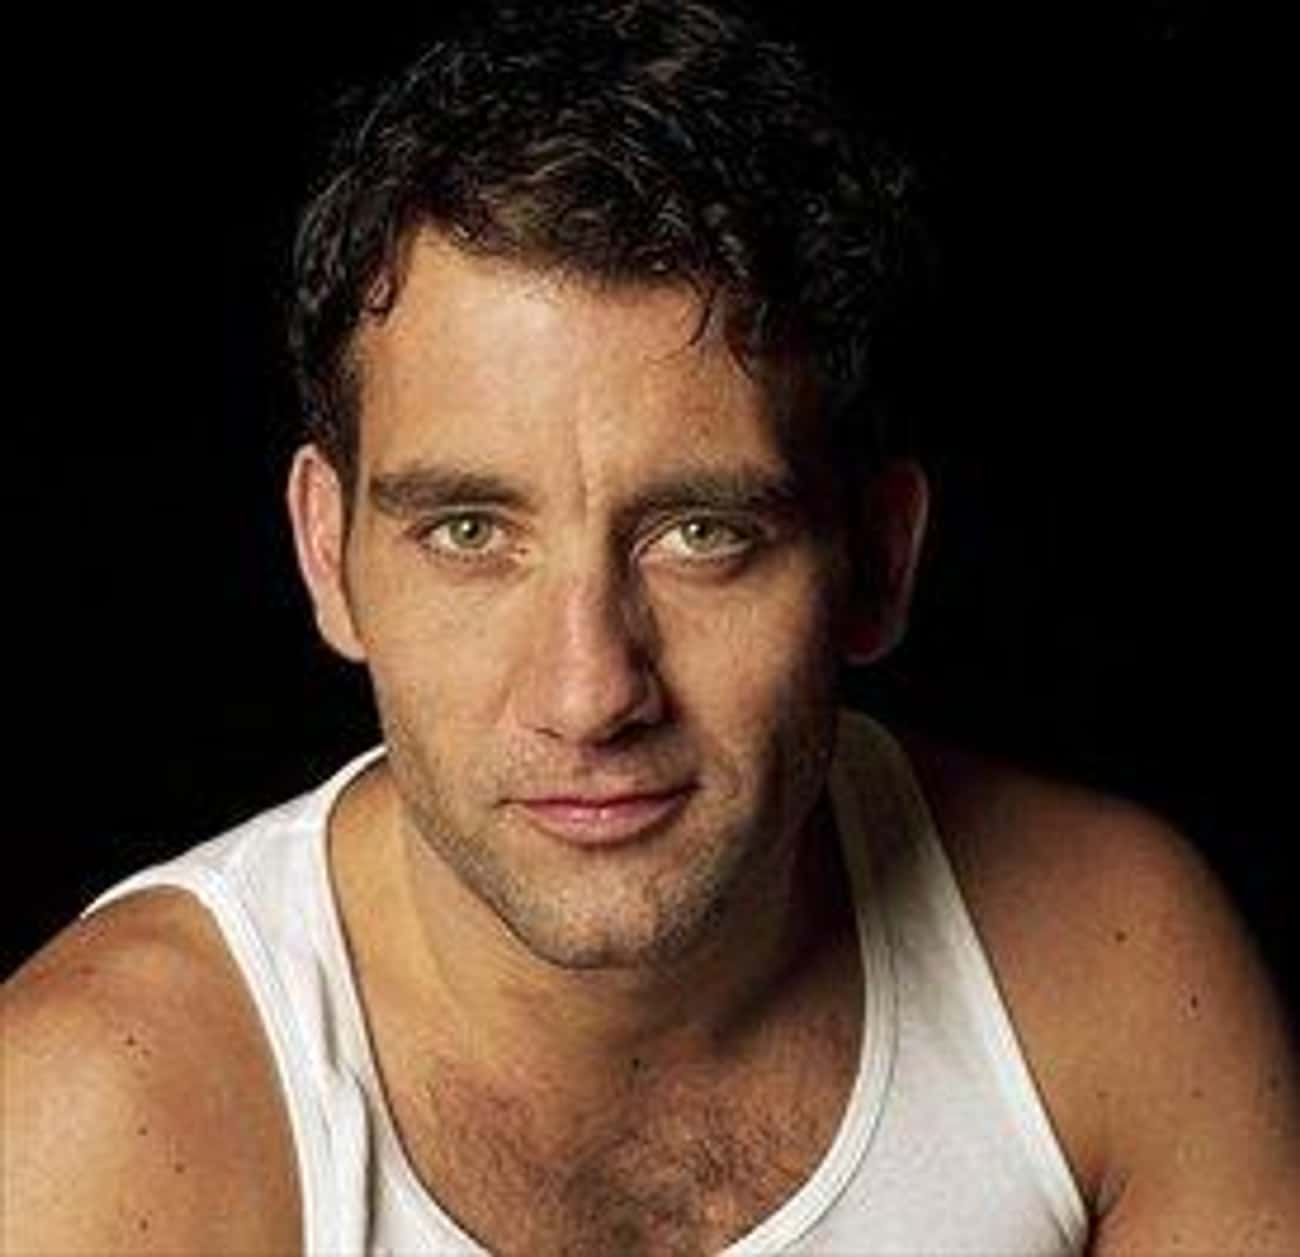 Clive Owen in White Sleeveless Shirt